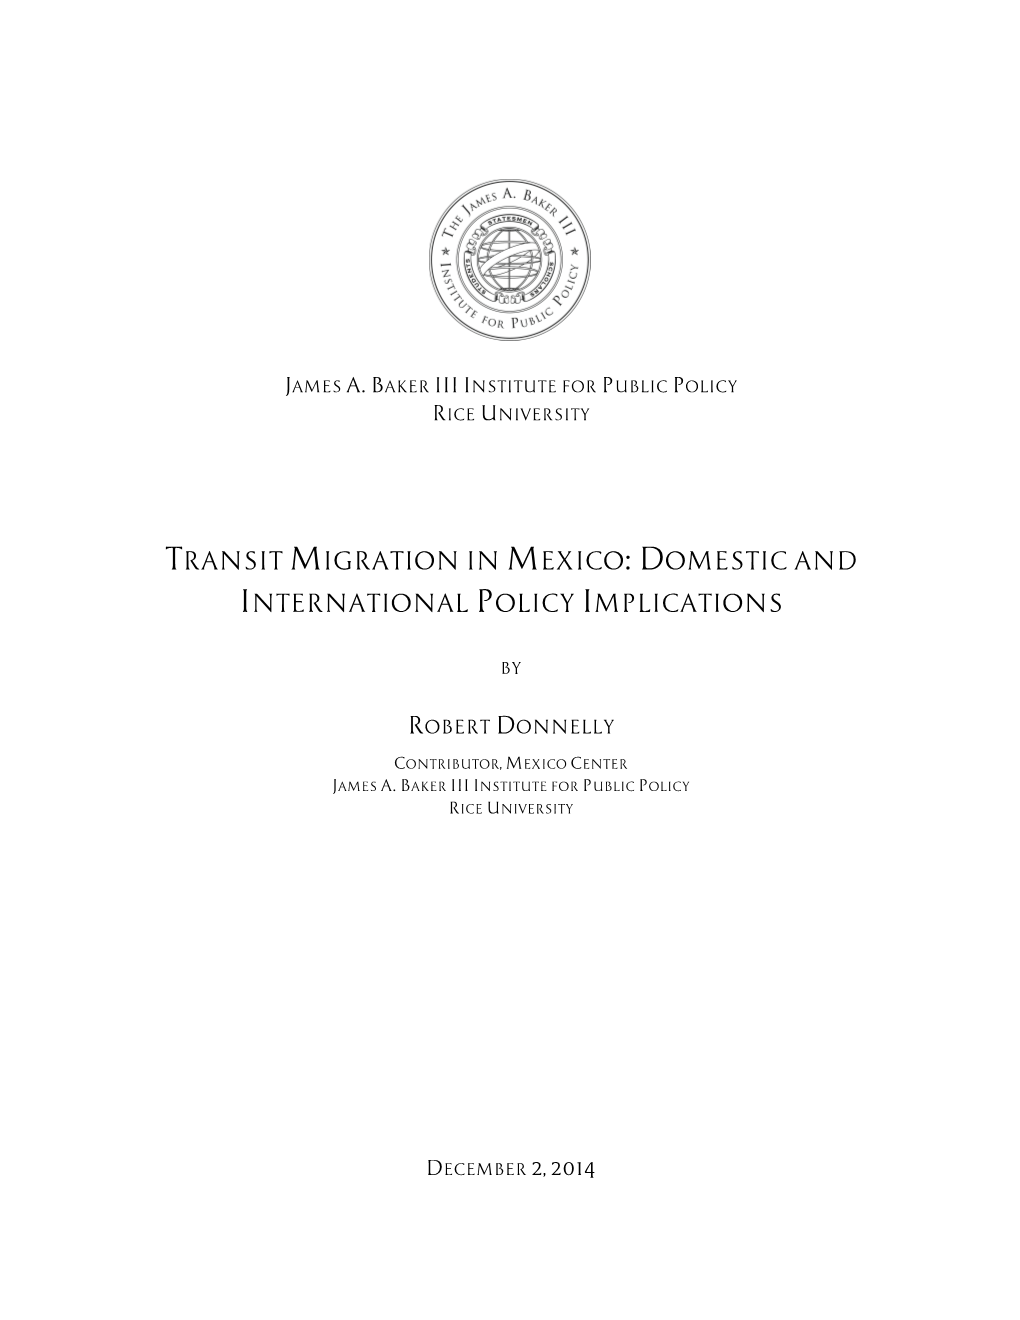 Transit Migration in Mexico: Domestic and International Policy Implications